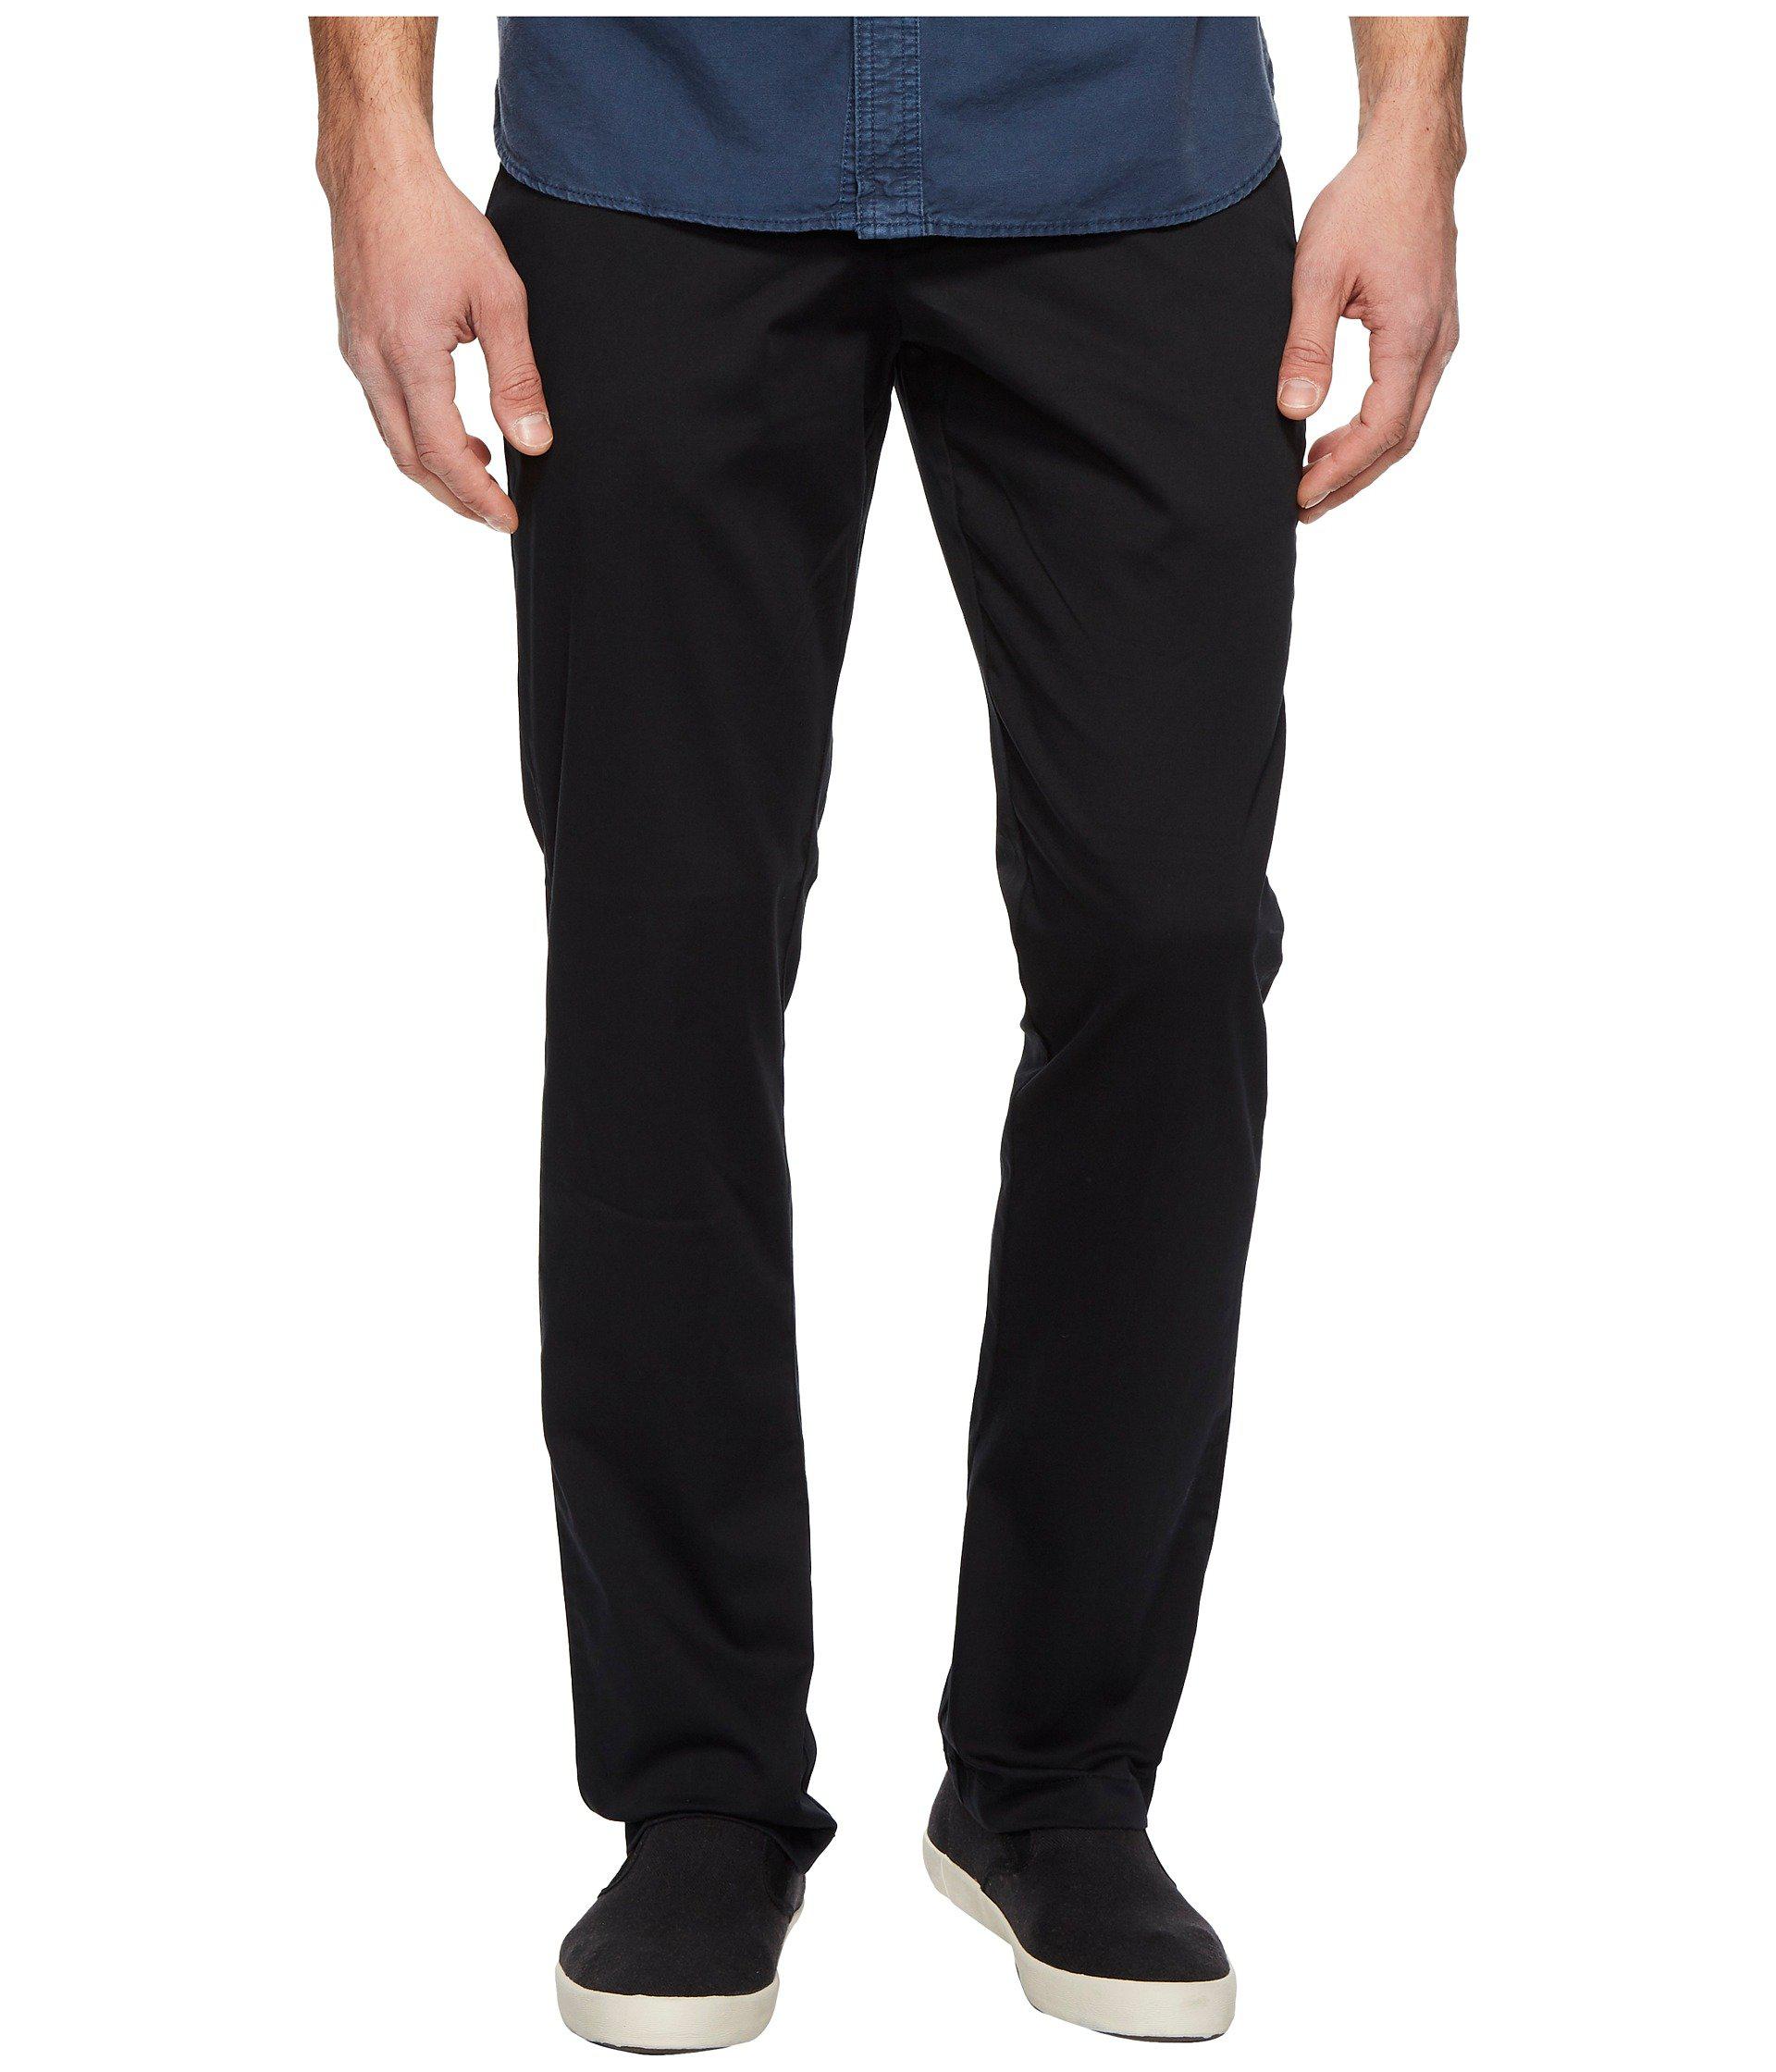 Tommy Bahama Denim Boracay Flat Front Chino Pant in Black for Men - Lyst